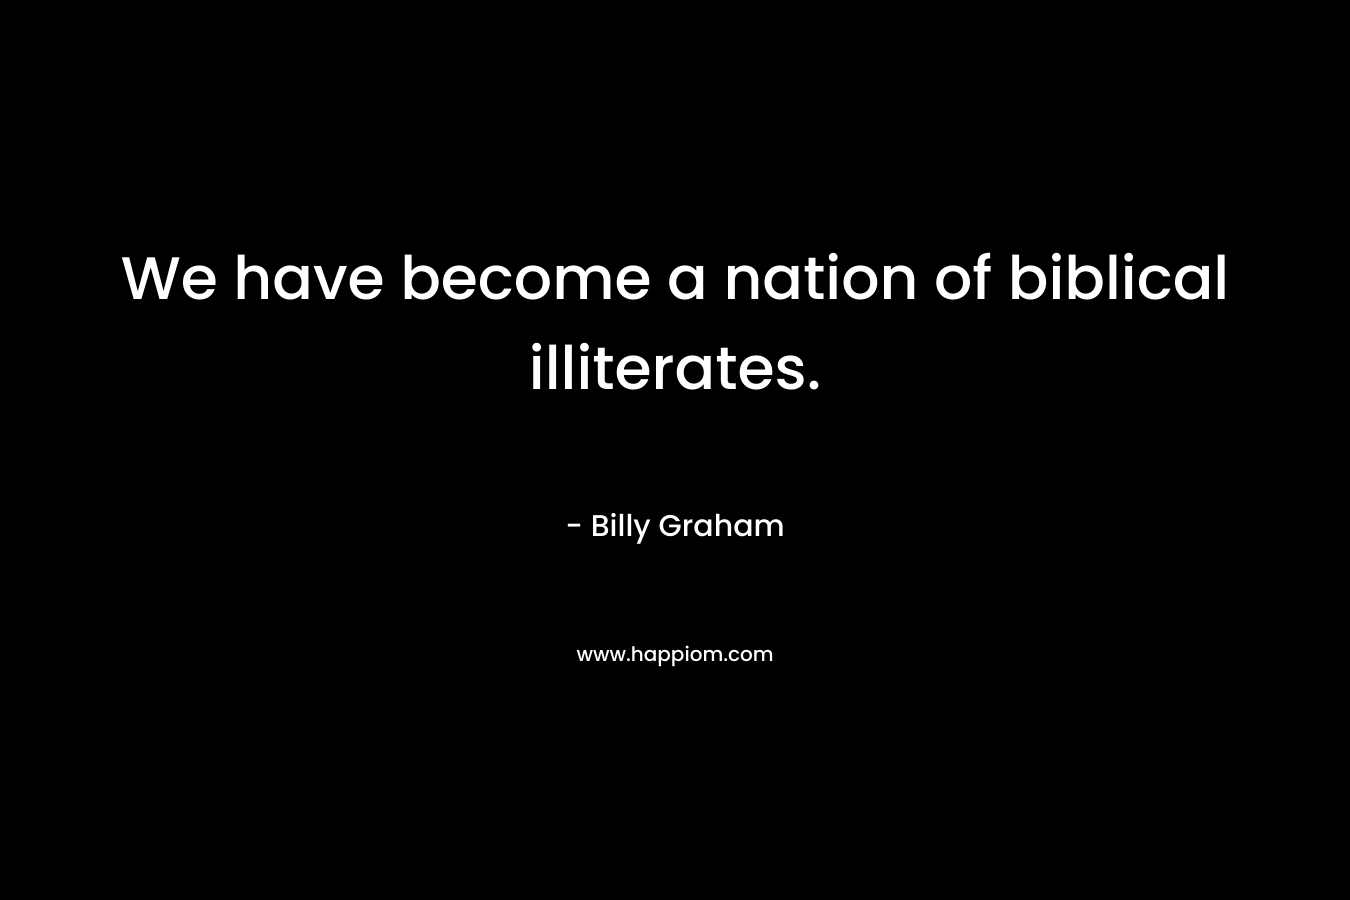 We have become a nation of biblical illiterates.